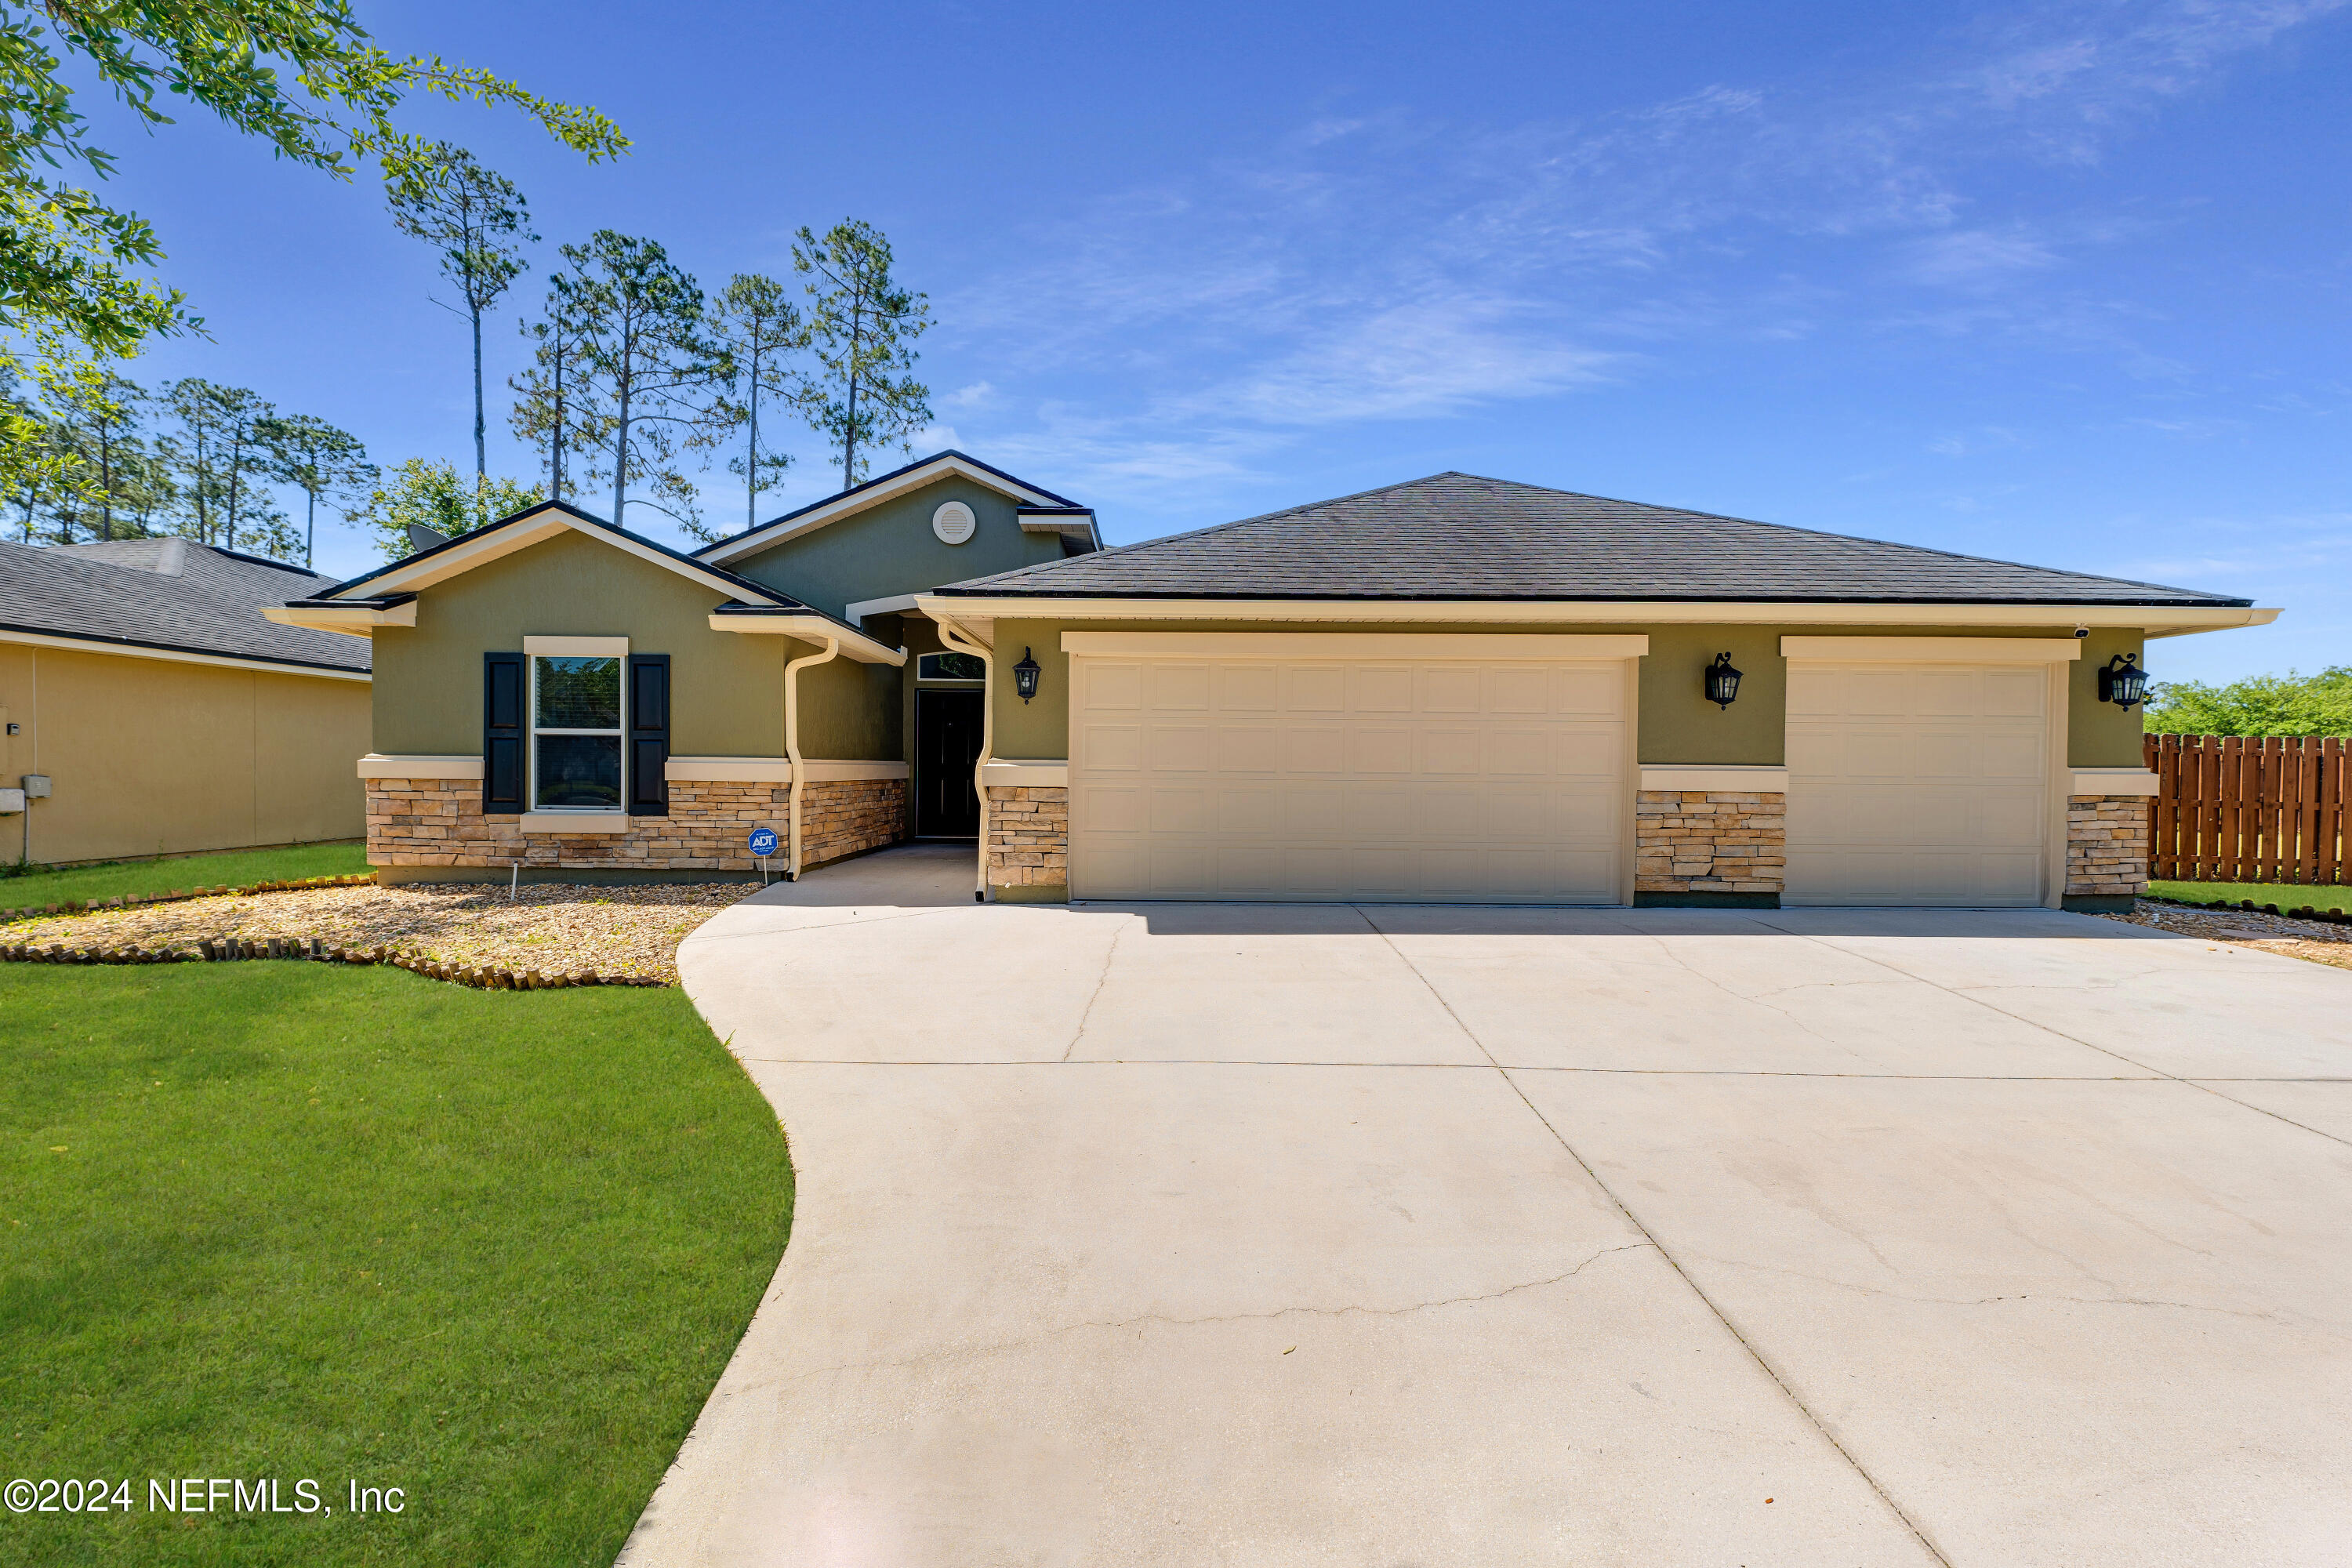 Middleburg, FL home for sale located at 1775 Foggy Day Drive, Middleburg, FL 32068